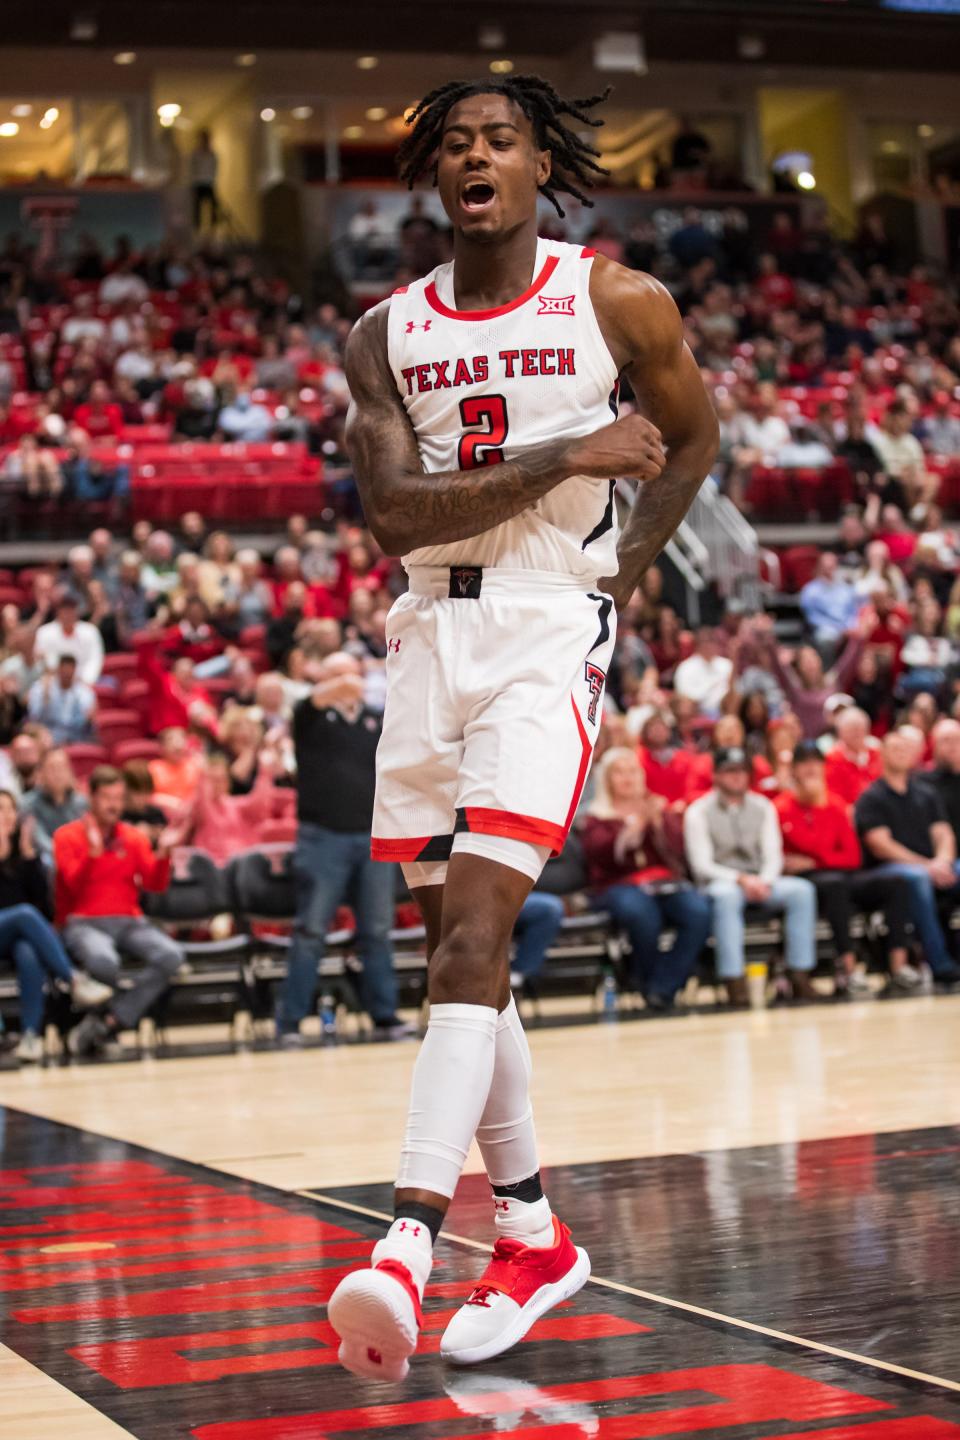 Texas Tech guard Davion Warren (2) reacts after dunking the ball against Prairie View A&M on Monday, Nov. 15, 2021, at United Supermarkets Arena in Lubbock, Texas.